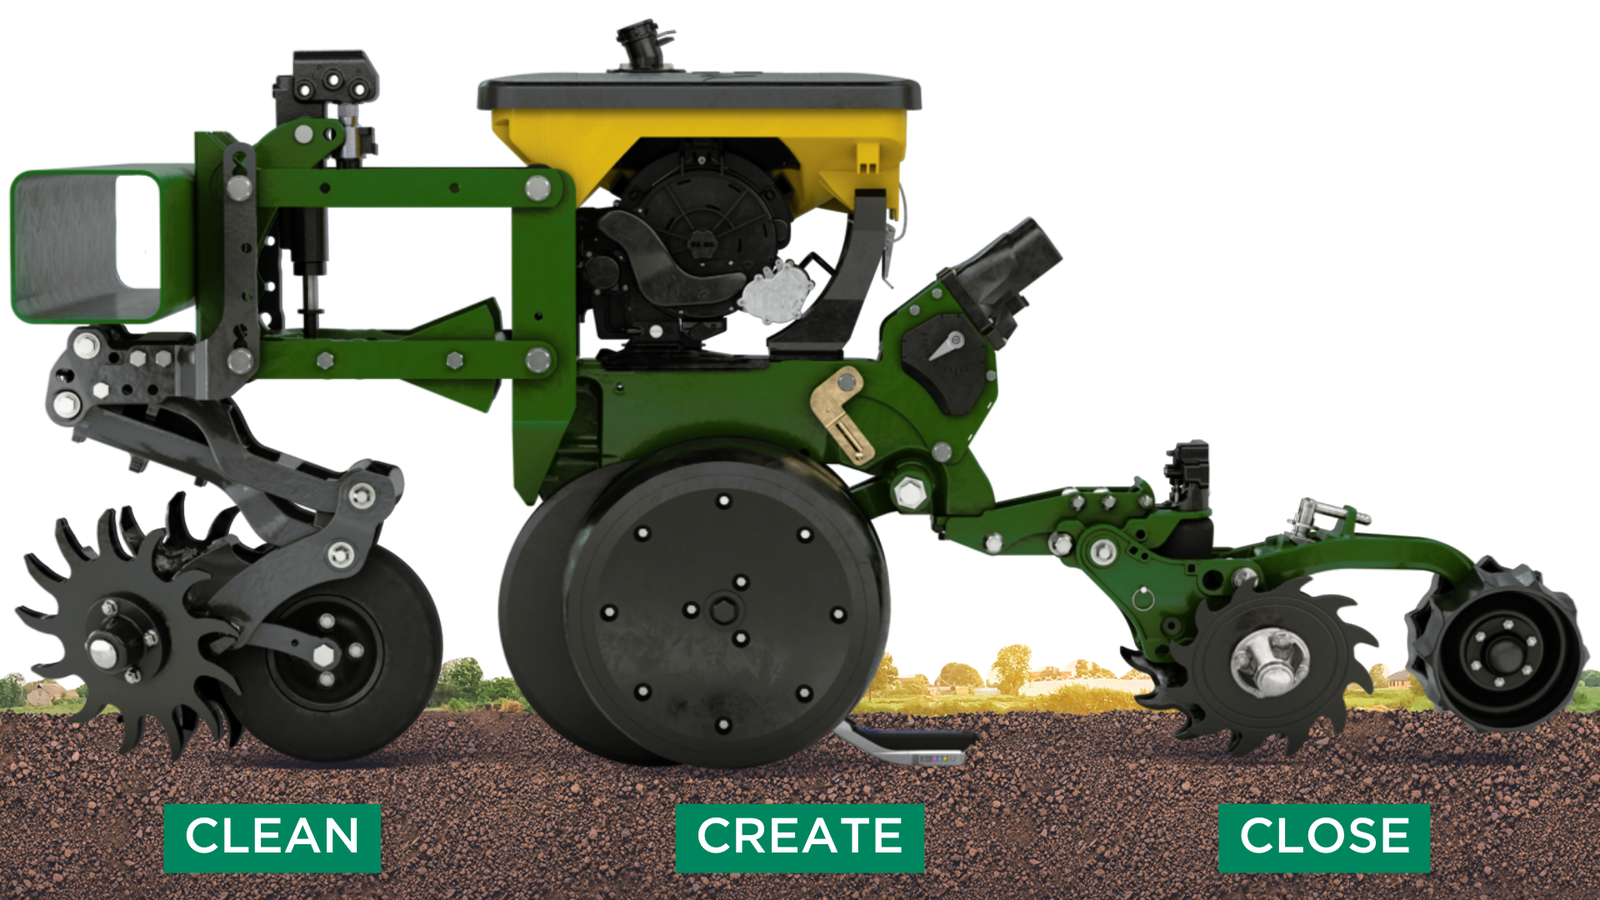 Precision Planting's planter row unit upgrades grouped by Clean, Create, and Close categories